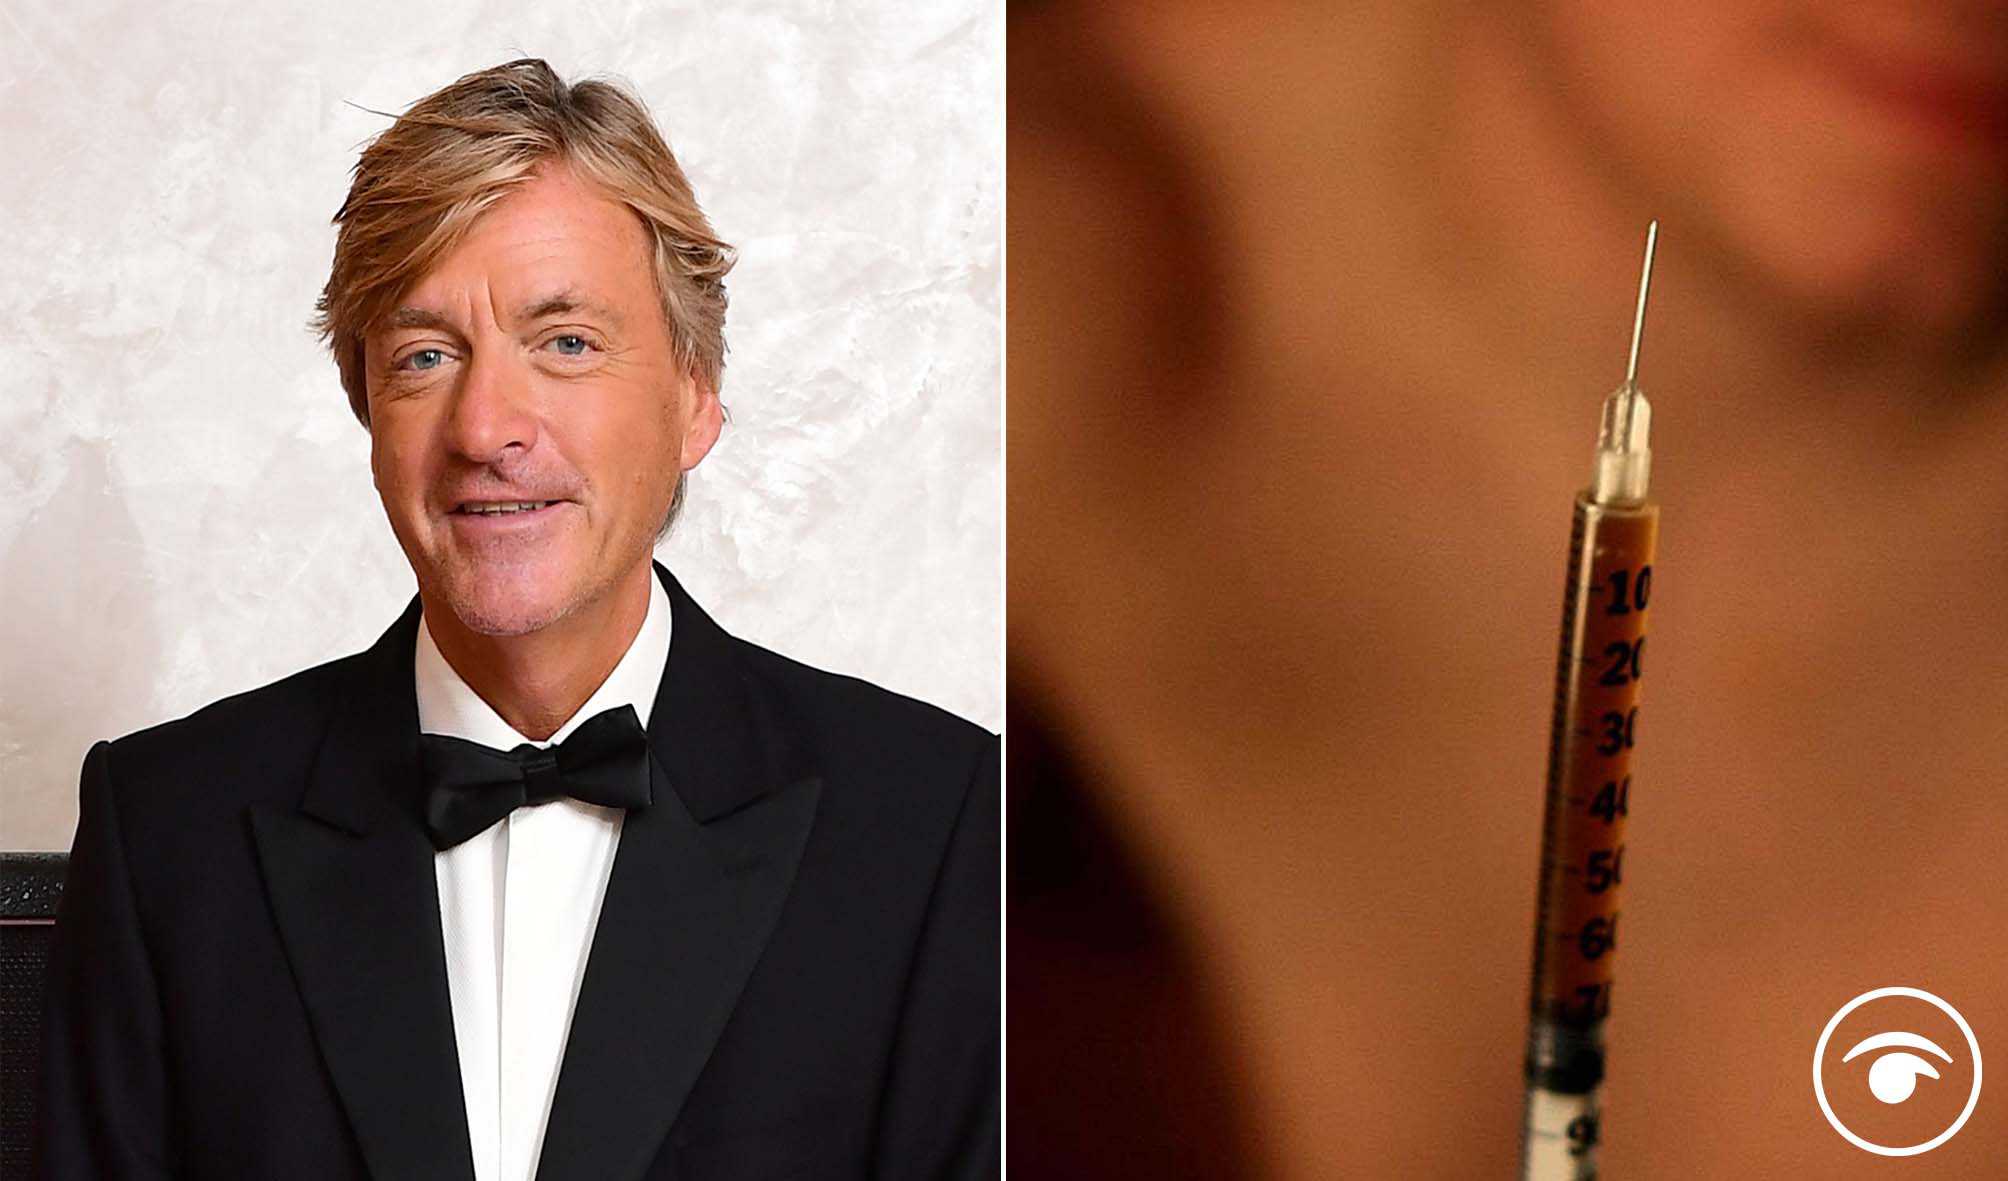 Watch: Richard Madeley slammed for comments to woman who was spiked